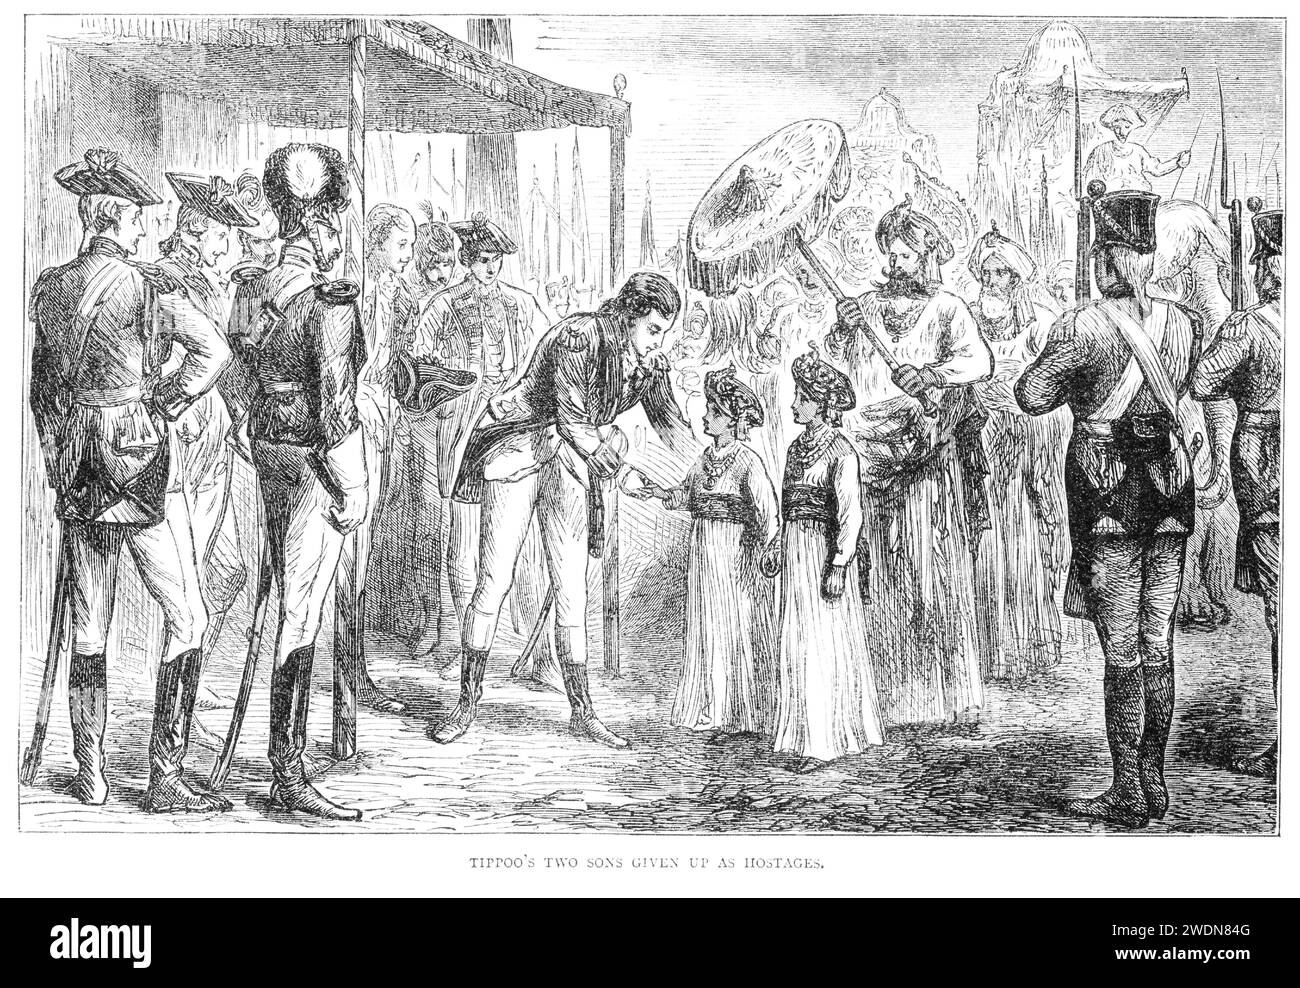 The two sons of Tipu Sahib, Sultan of Mysore, being handed over as hostages to General Cornwallis. This event ended the Third Anglo-Mysore War. Lord Cornwallis had defeated Tipu in May 1791 but the ‘Definitive Treaty’ was not signed until March 1792, at which time two of Tipu’s sons were taken as temporary hostages by the British to ensure compliance with the treaty. Image published 1904. Stock Photo